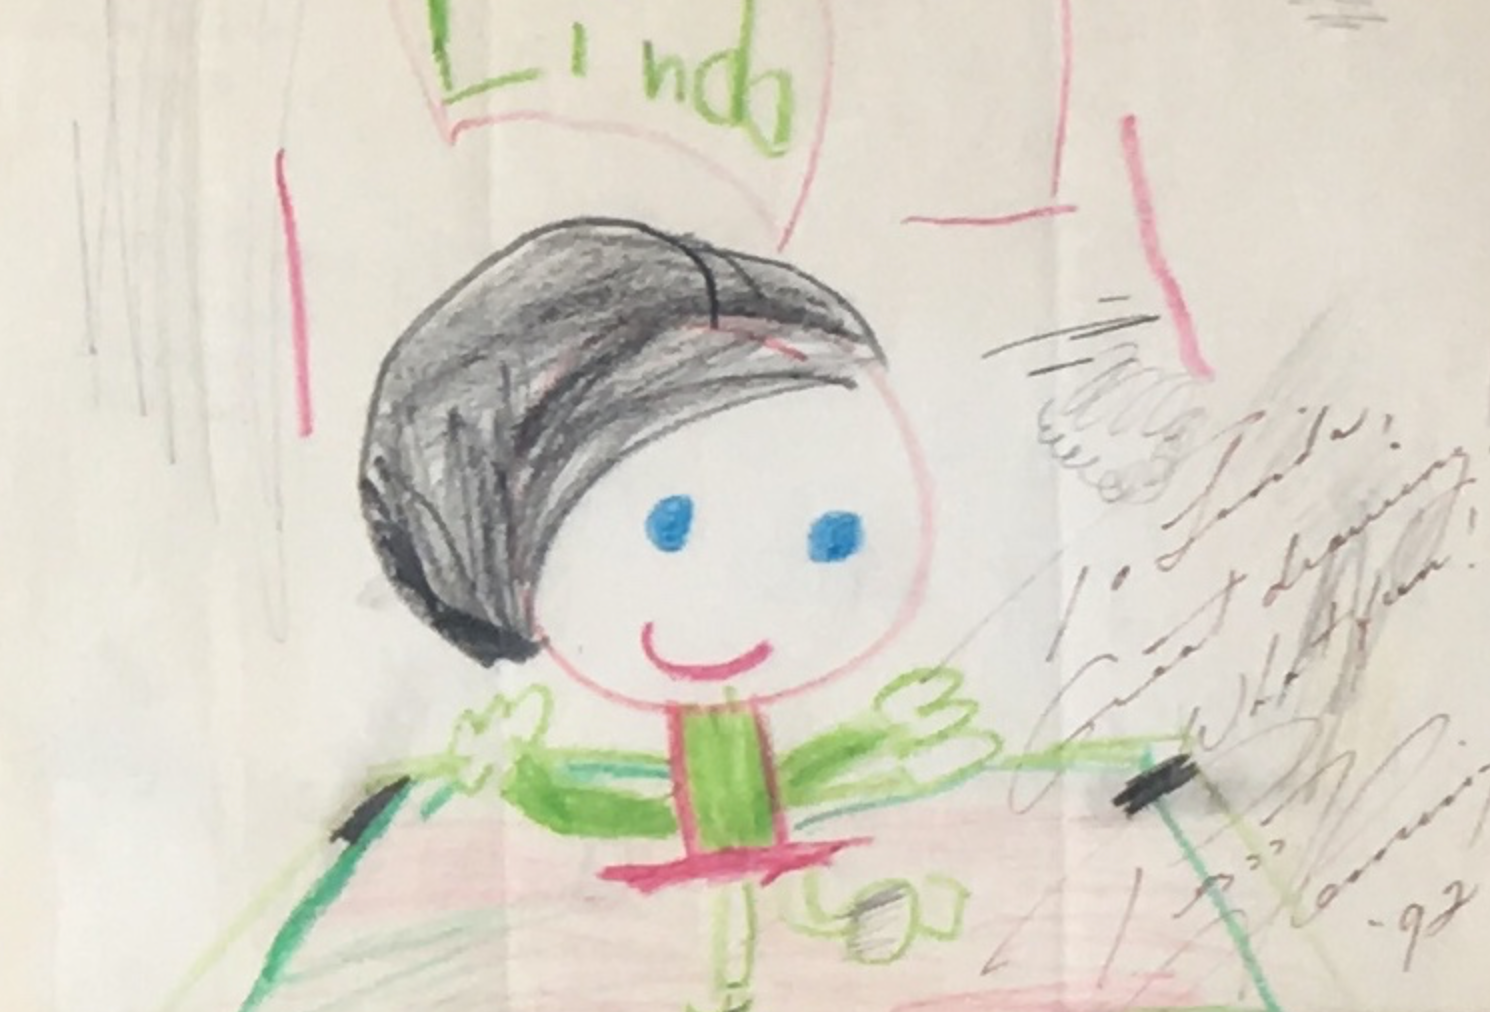 Linda's painting: who knew she had a successful future at an art gallery waiting for her?